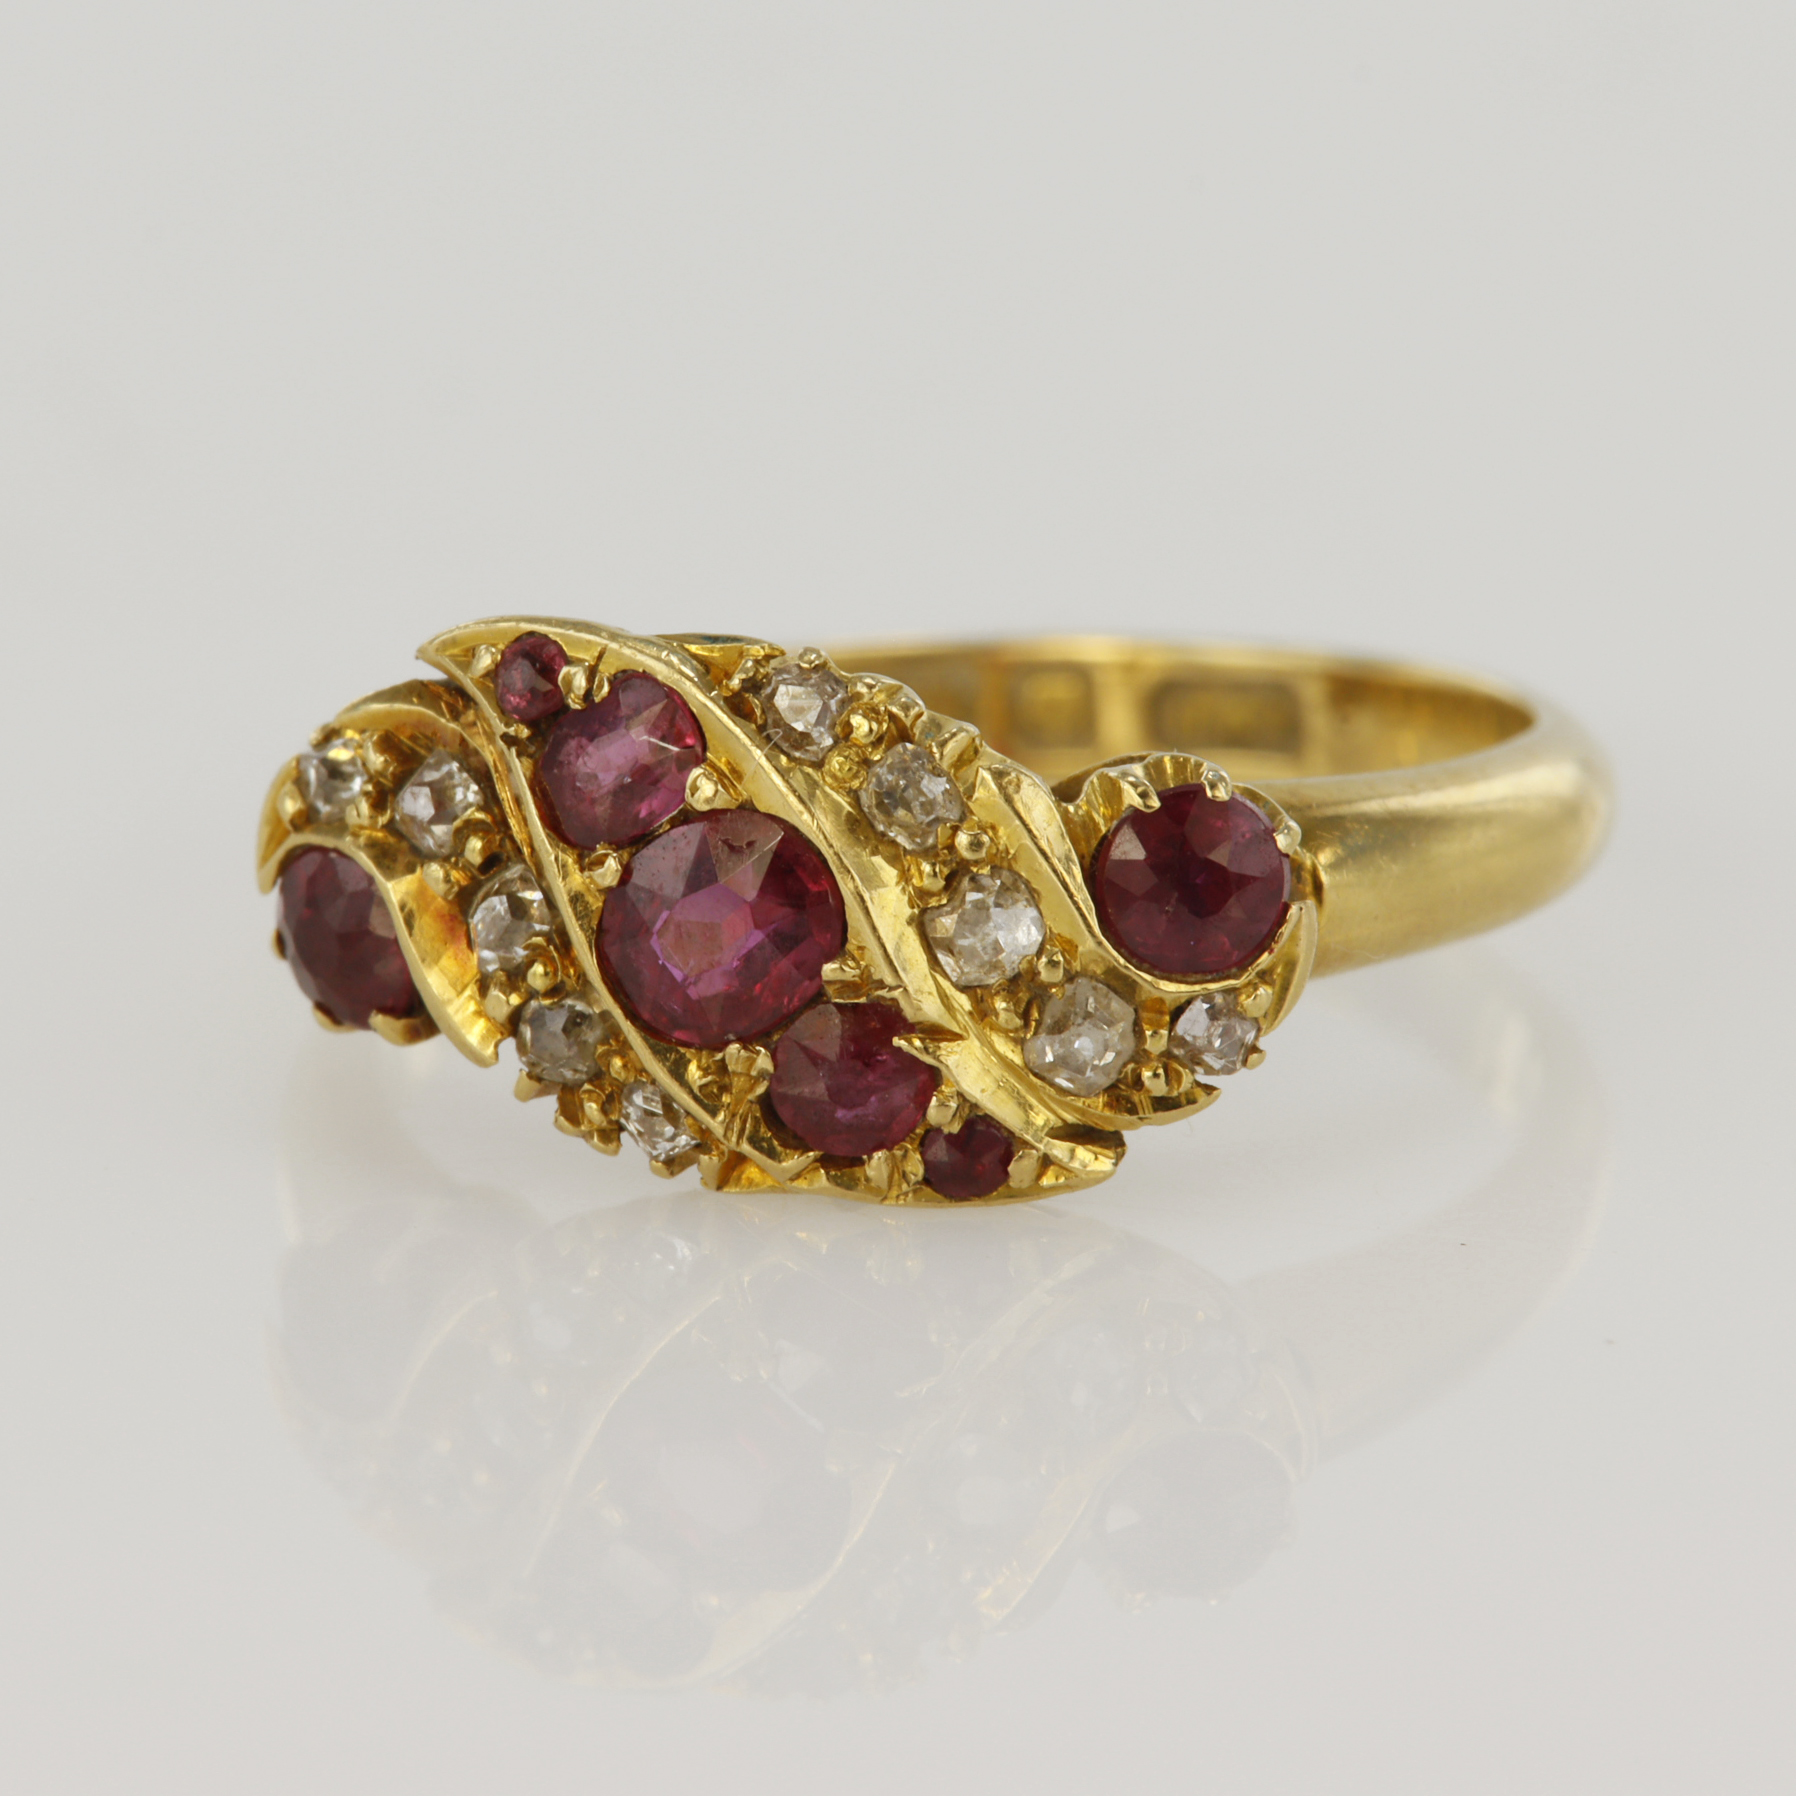 18ct yellow gold Edwardian diamond and ruby ring, seven rubies principle measures 3.5 x 3mm, ten